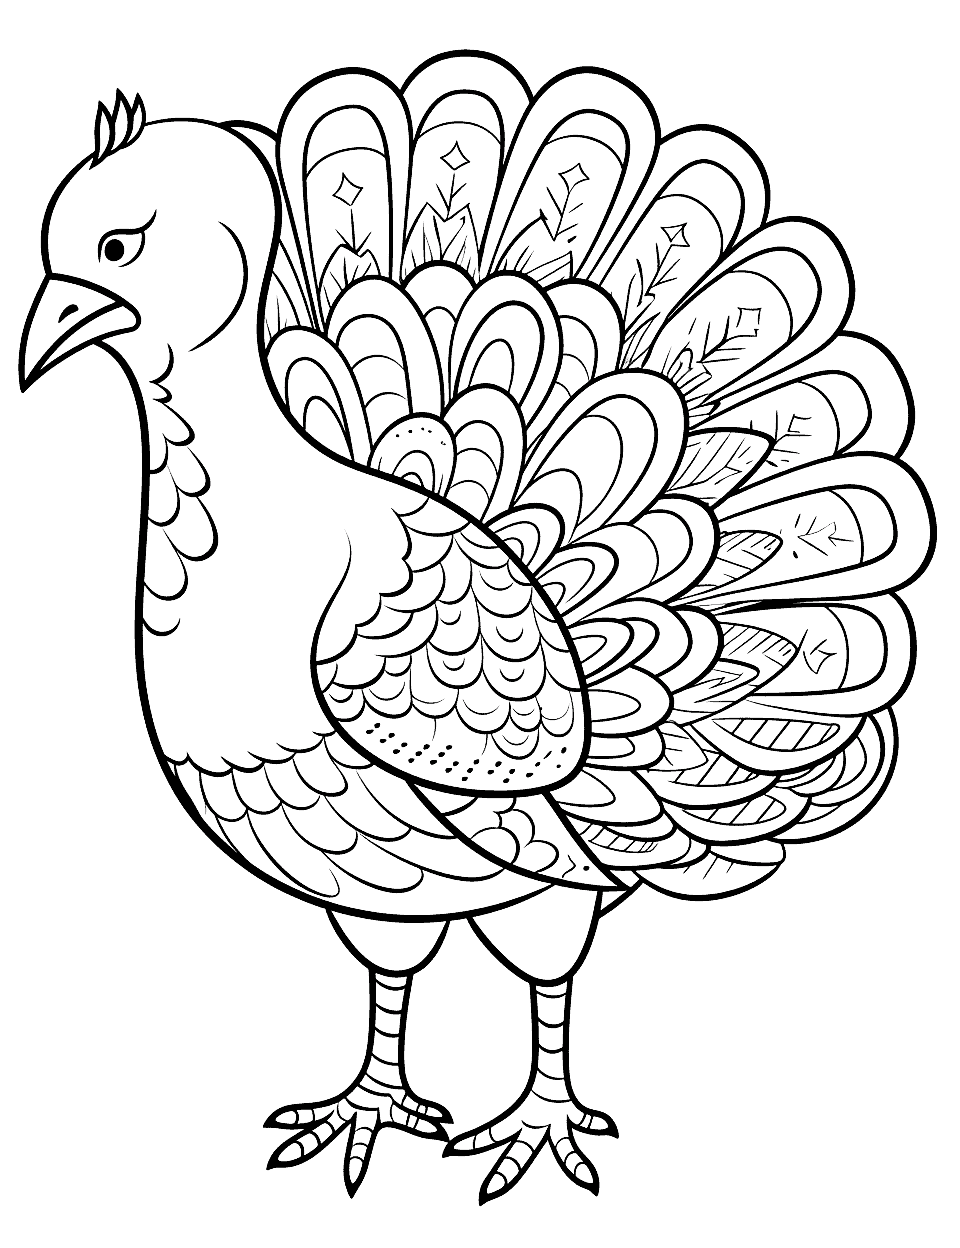 Artistic Turkey Coloring Page - A unique and difficult-to-color turkey.